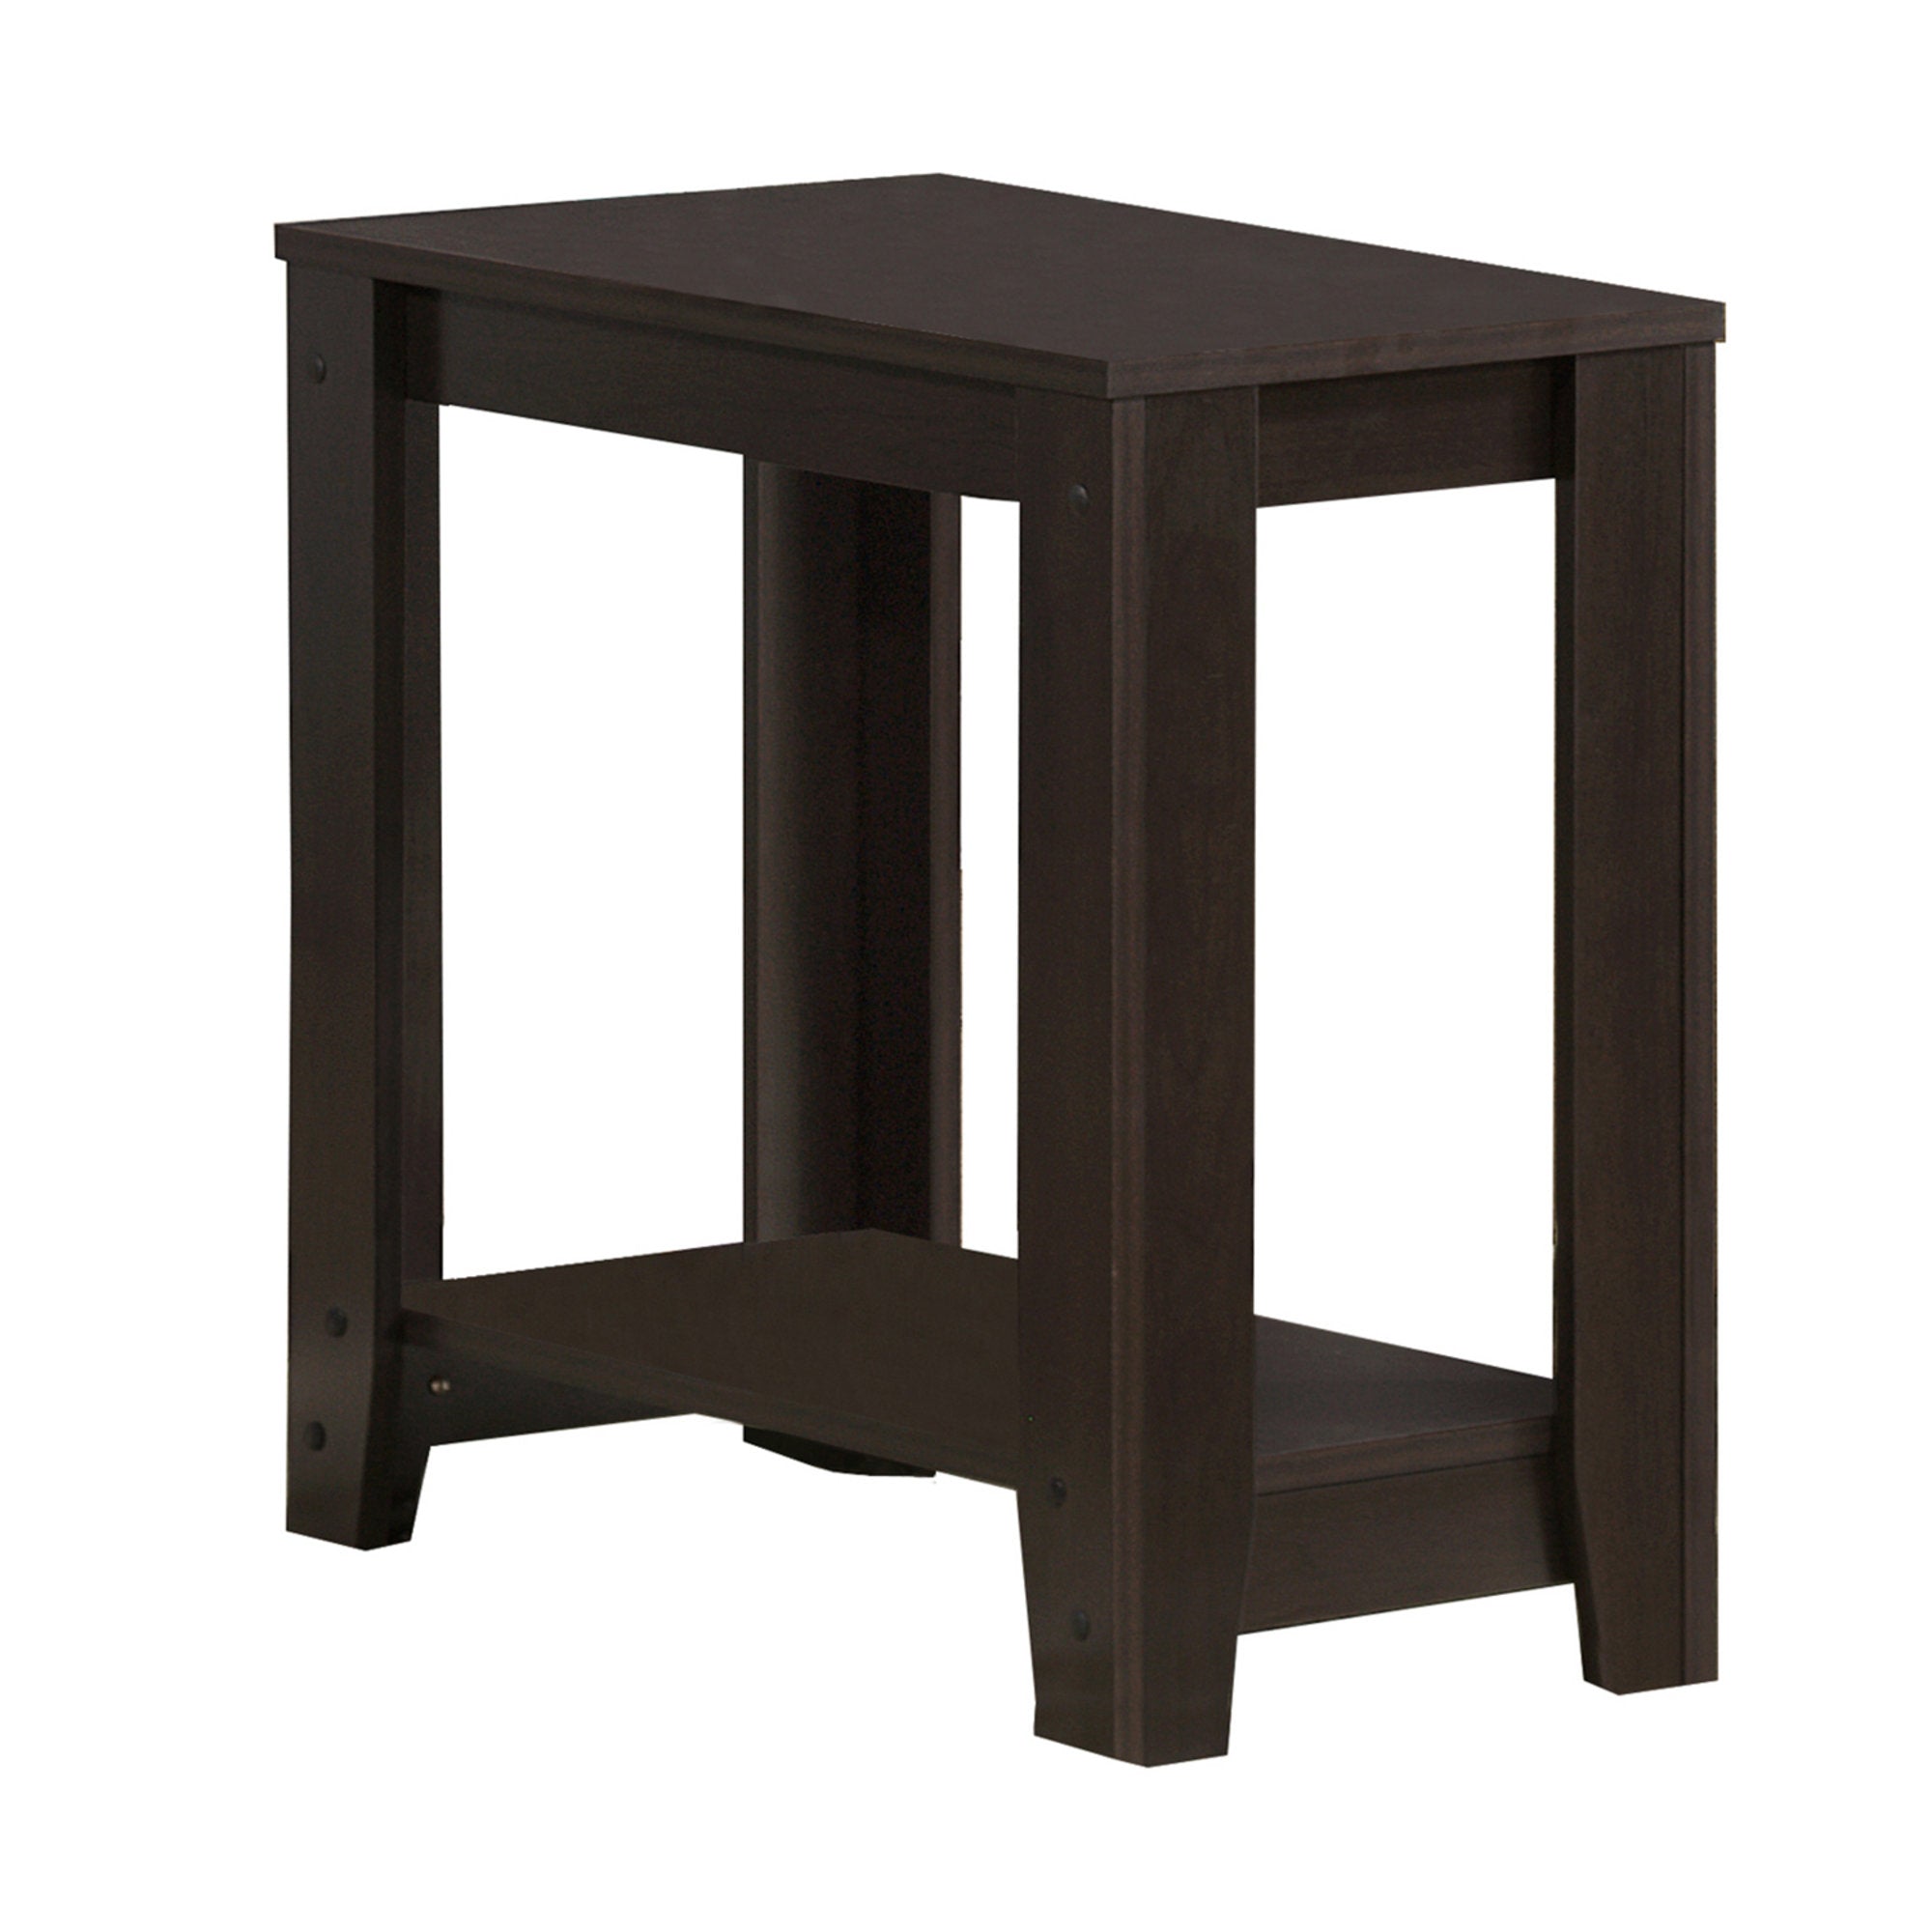 MN-373119    Accent Table, Side, End, Nightstand, Lamp, Living Room, Bedroom, Laminate, Dark Brown, Contemporary, Modern